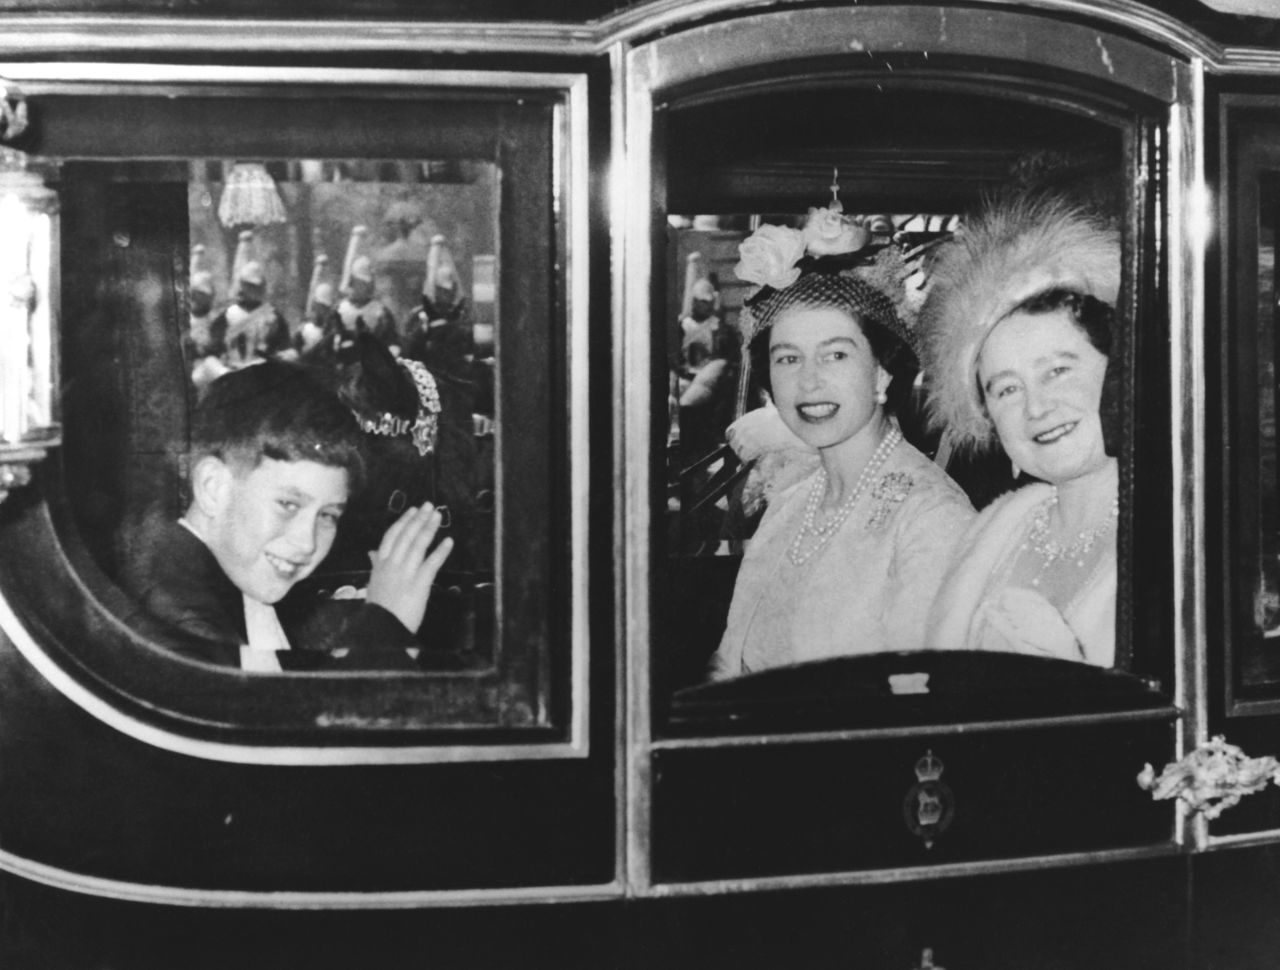 Charles rides with his mother and grandmother as they travel to Westminster Abbey for the wedding of Princess Margaret in May 1960.